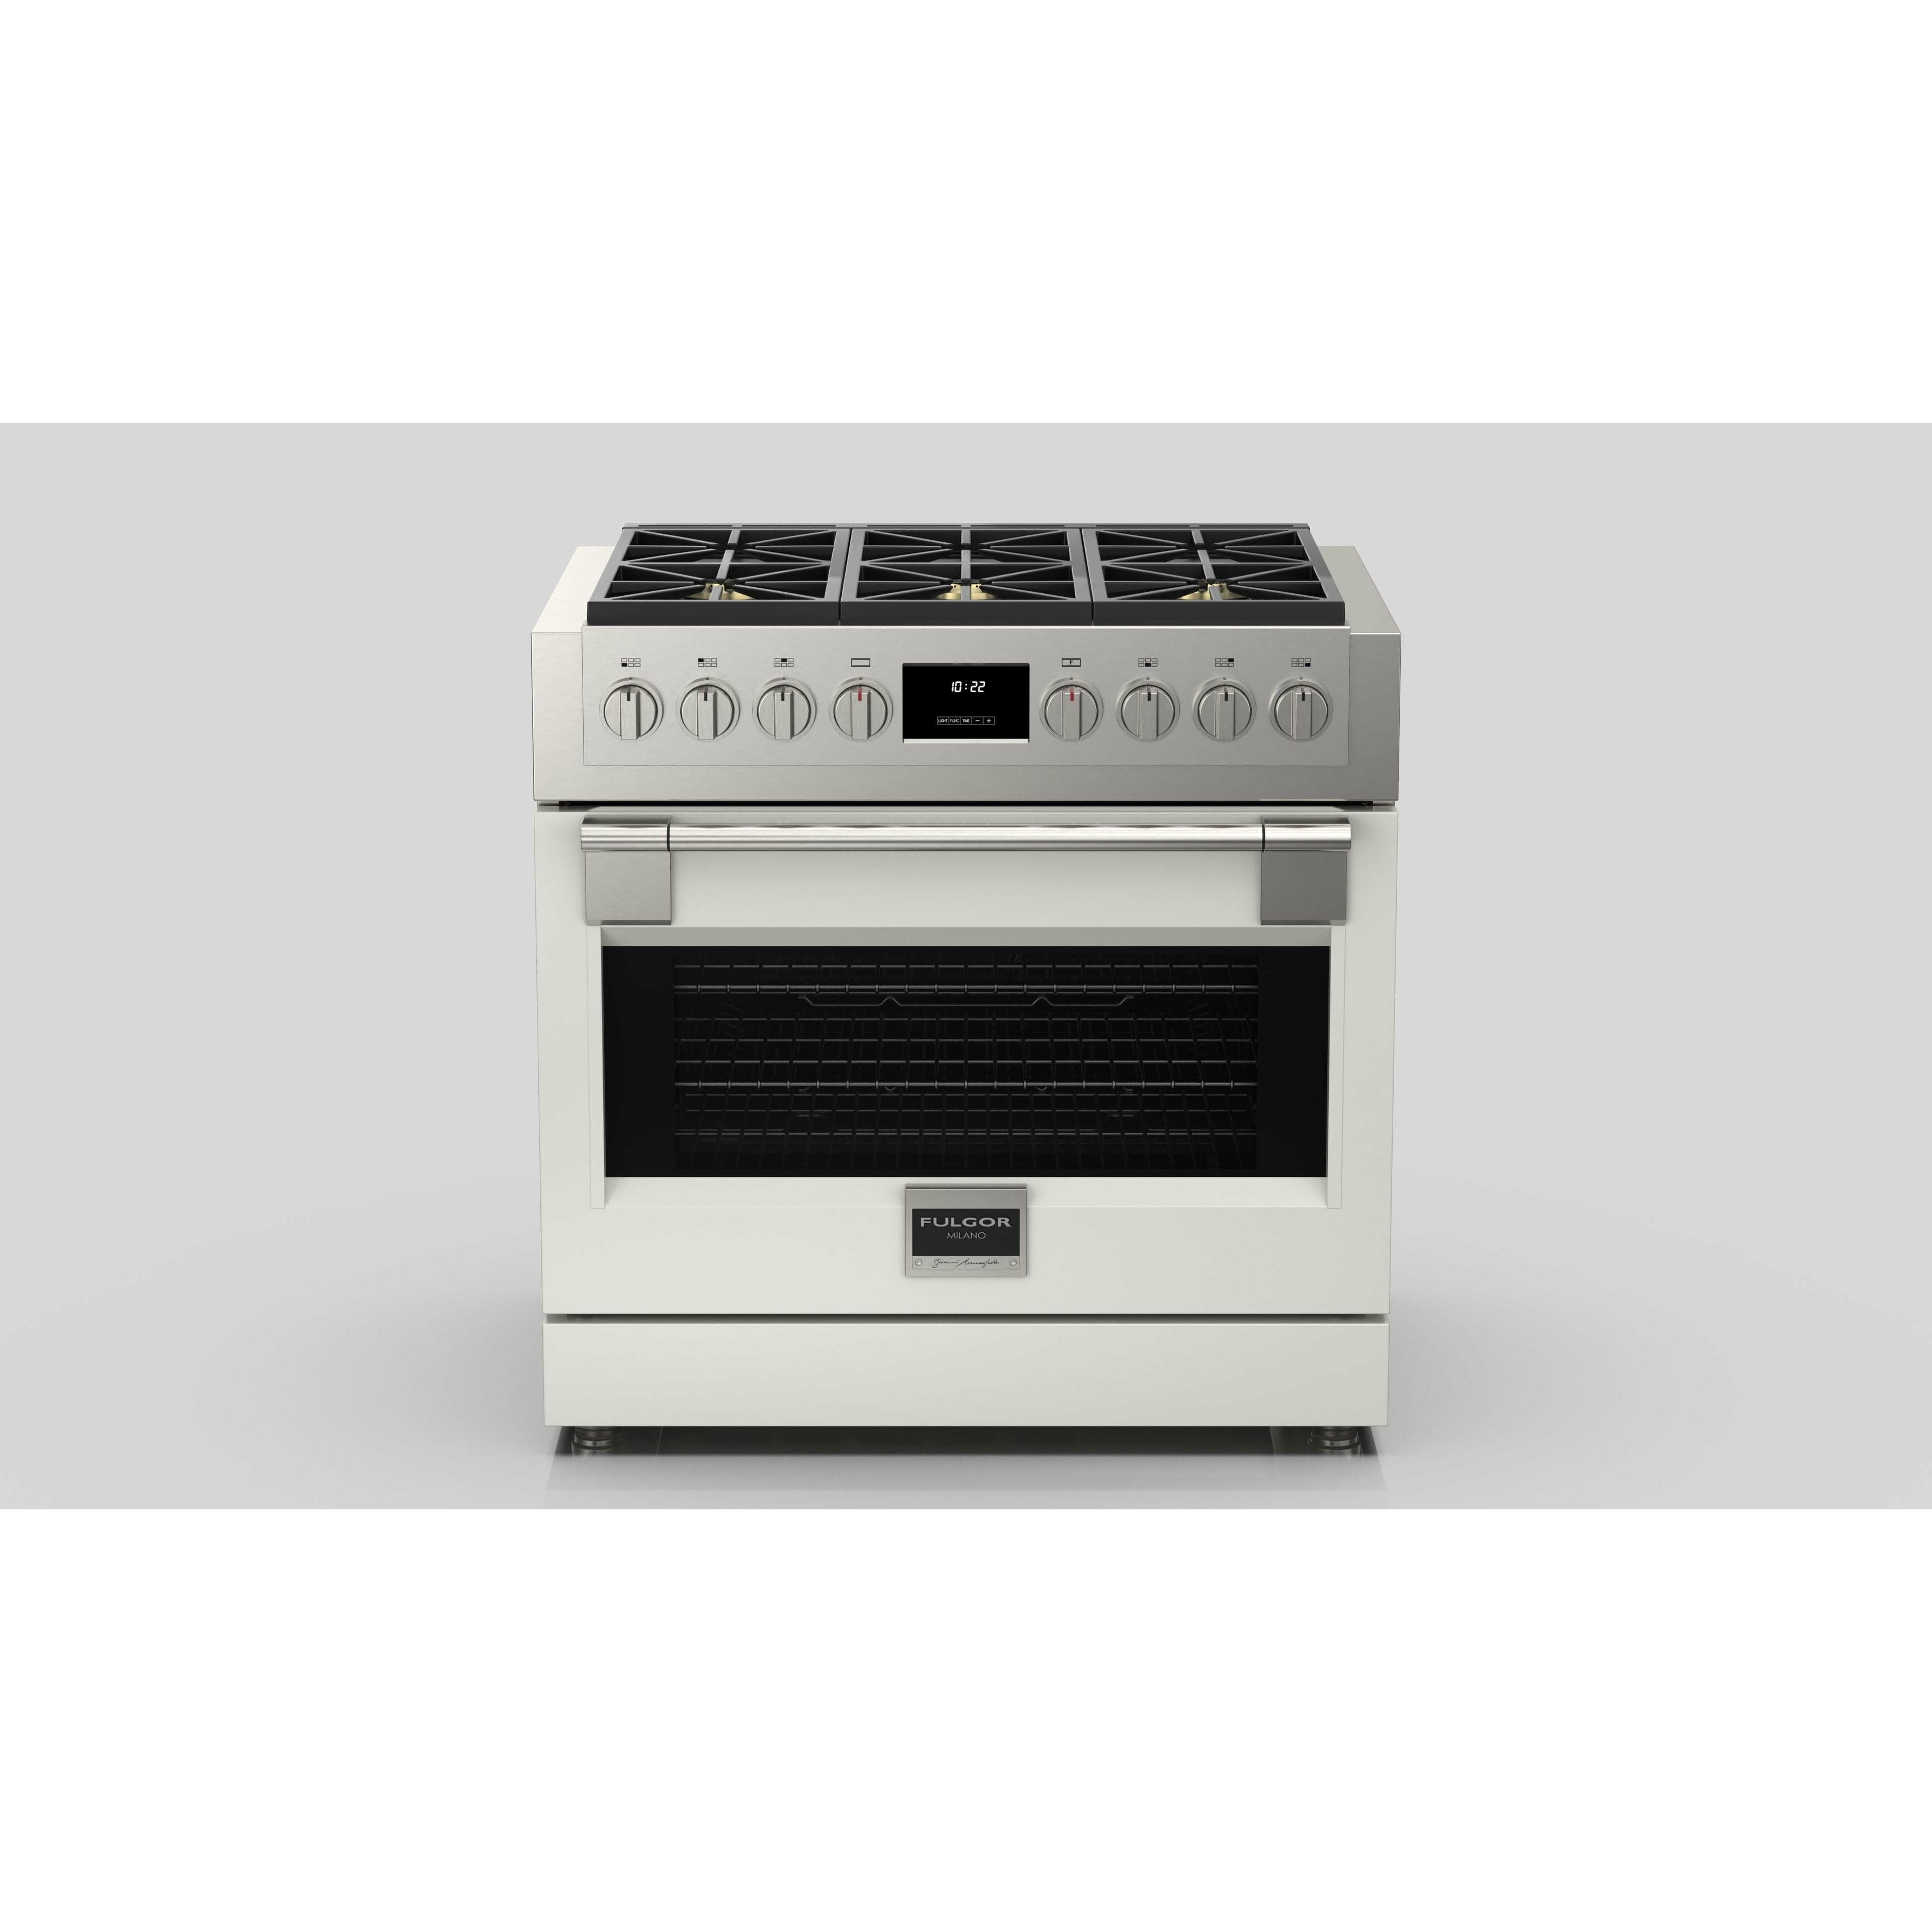 Fulgor Milano 36" Professional Gas Range with 6 Dual-Flame Burners, 5.7 cu. ft. Capacity, Stainless Steel - F6PGR366S2 Ranges PDRKIT36WH Luxury Appliances Direct